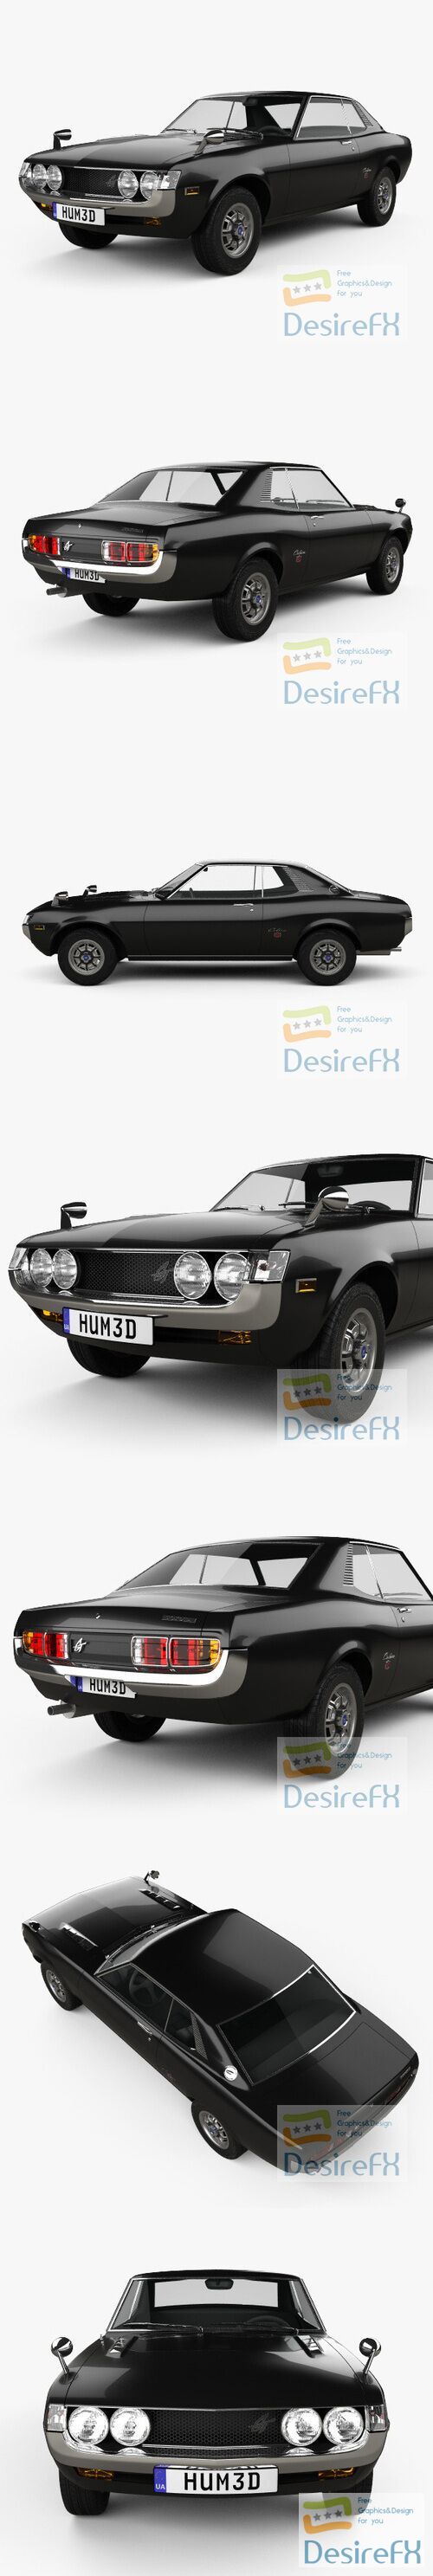 Toyota Celica 1600 GT Coupe 1973 3D Model